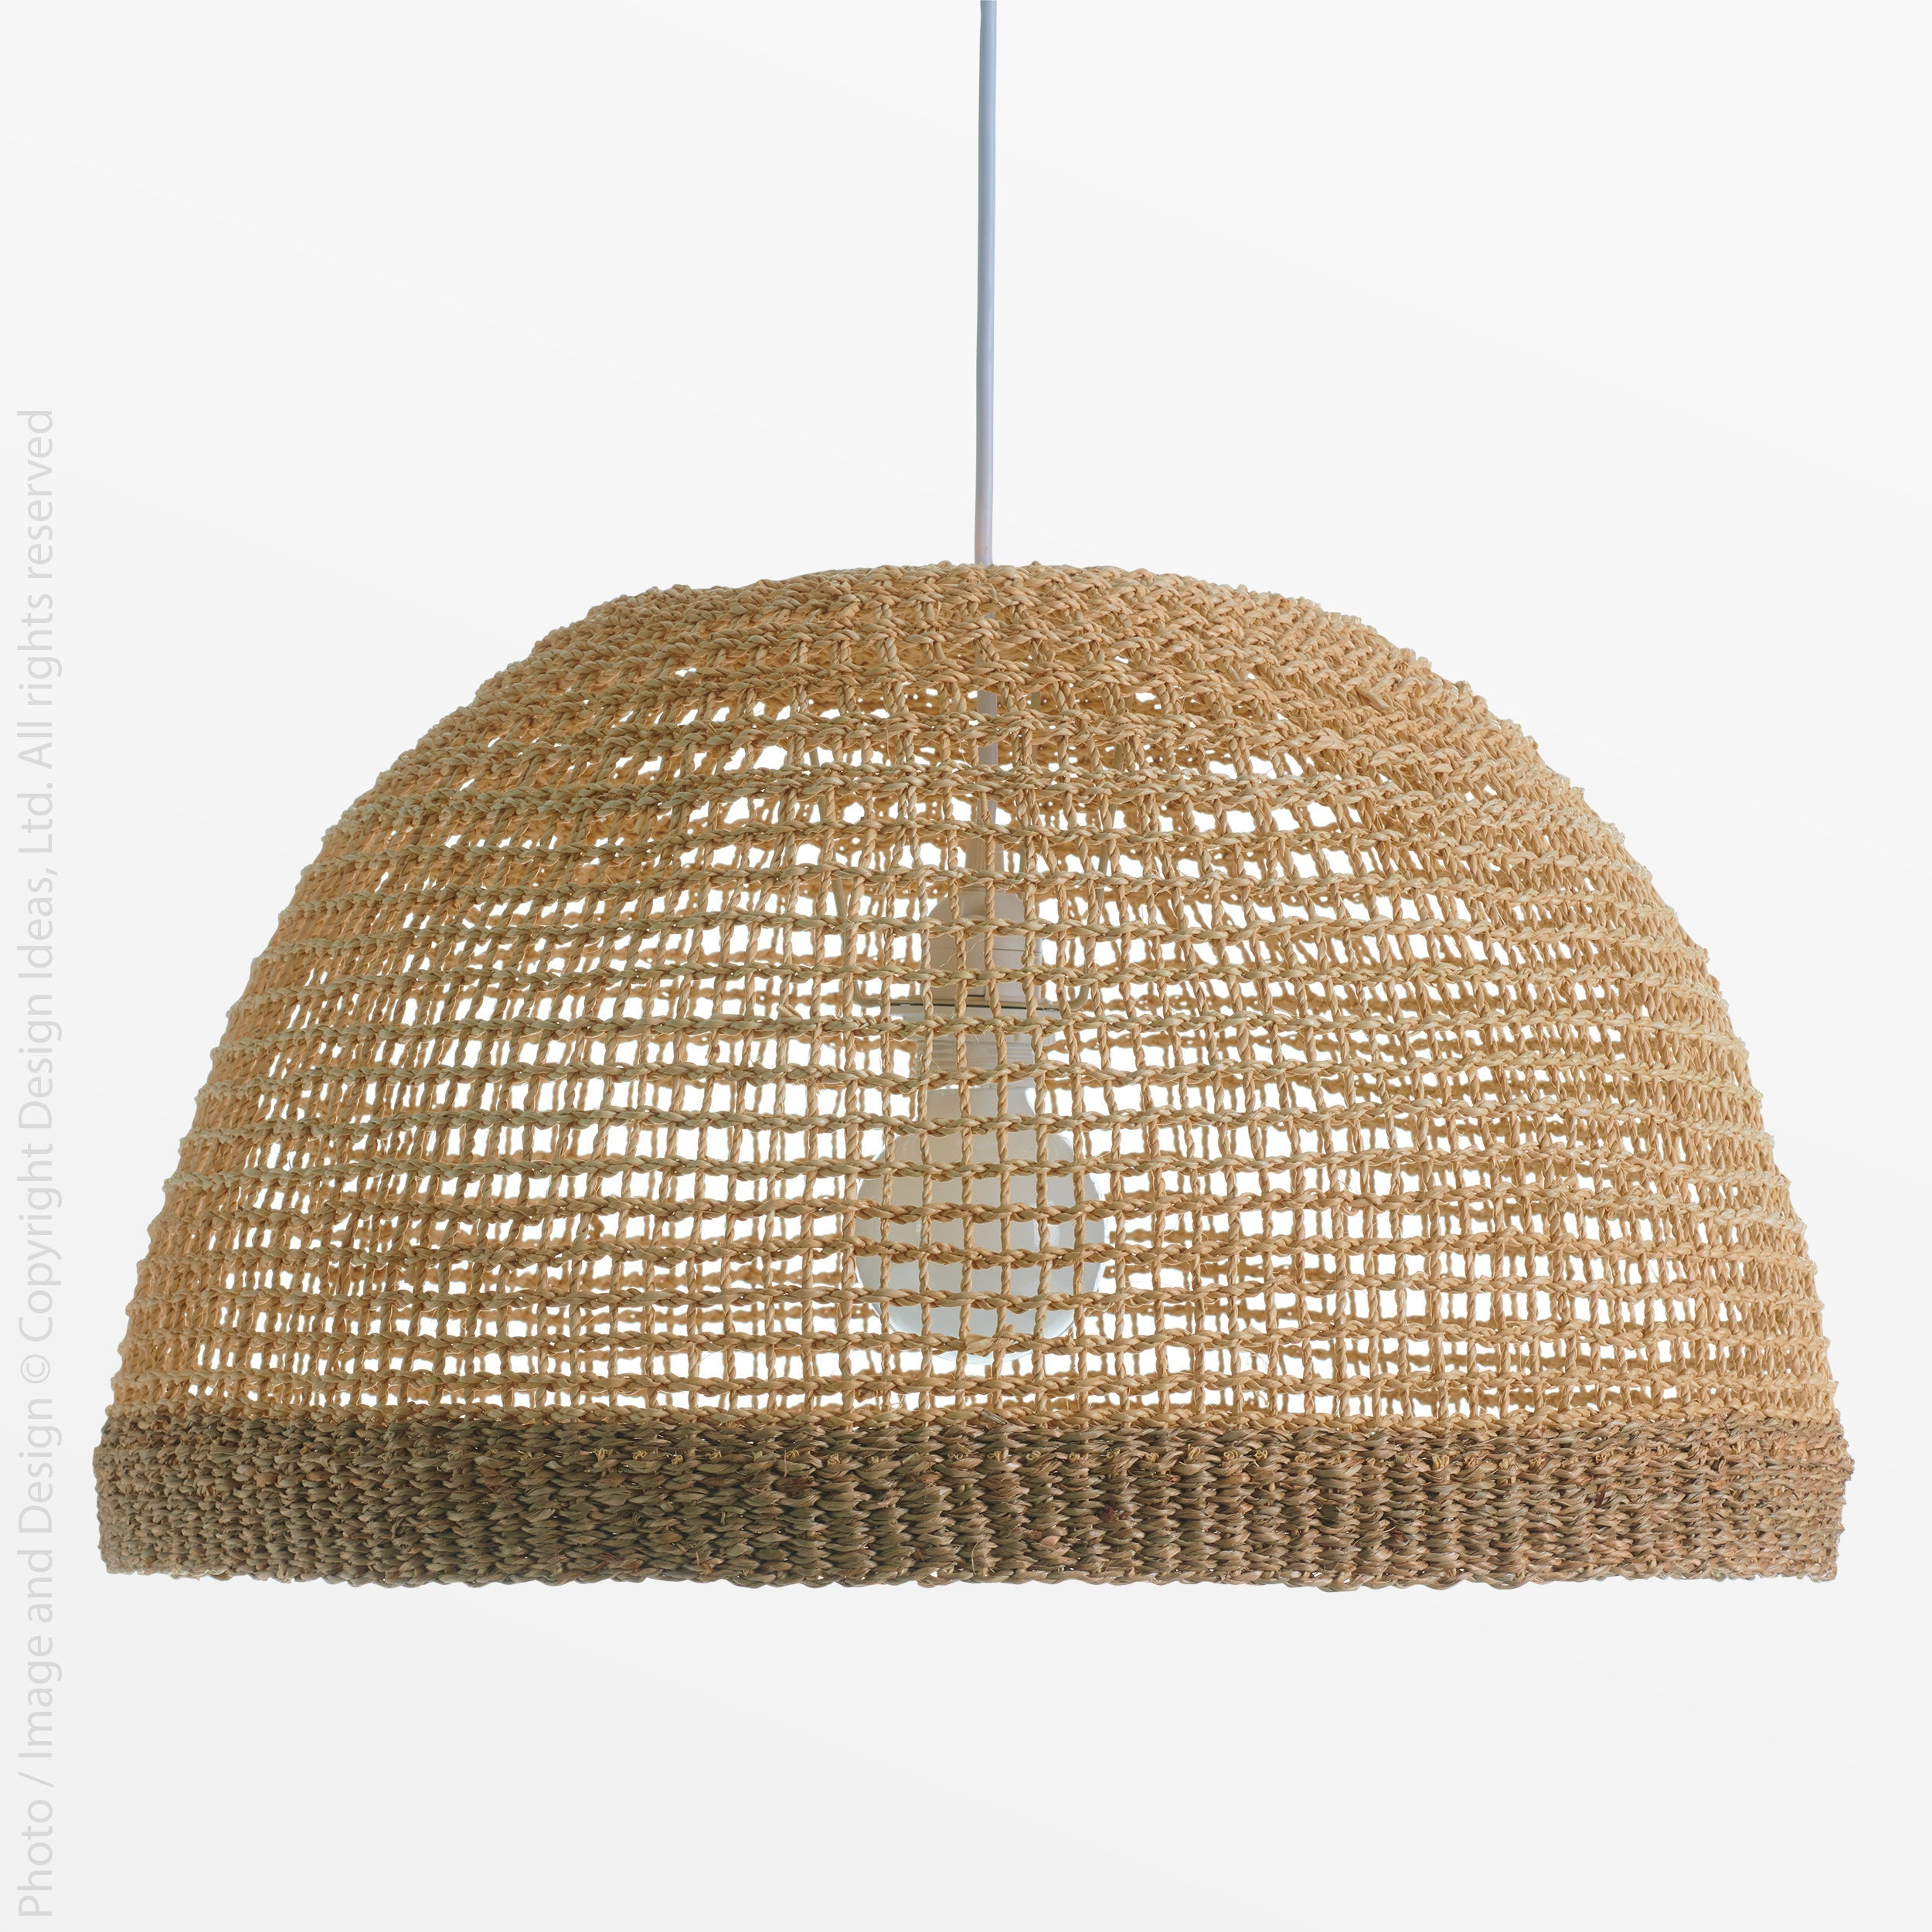 Cayman Seagrass Lampshade - natural Color | Image 1 | From the Cayman Collection | Exquisitely handmade with natural seagrass for long lasting use | Available in natural color | texxture home